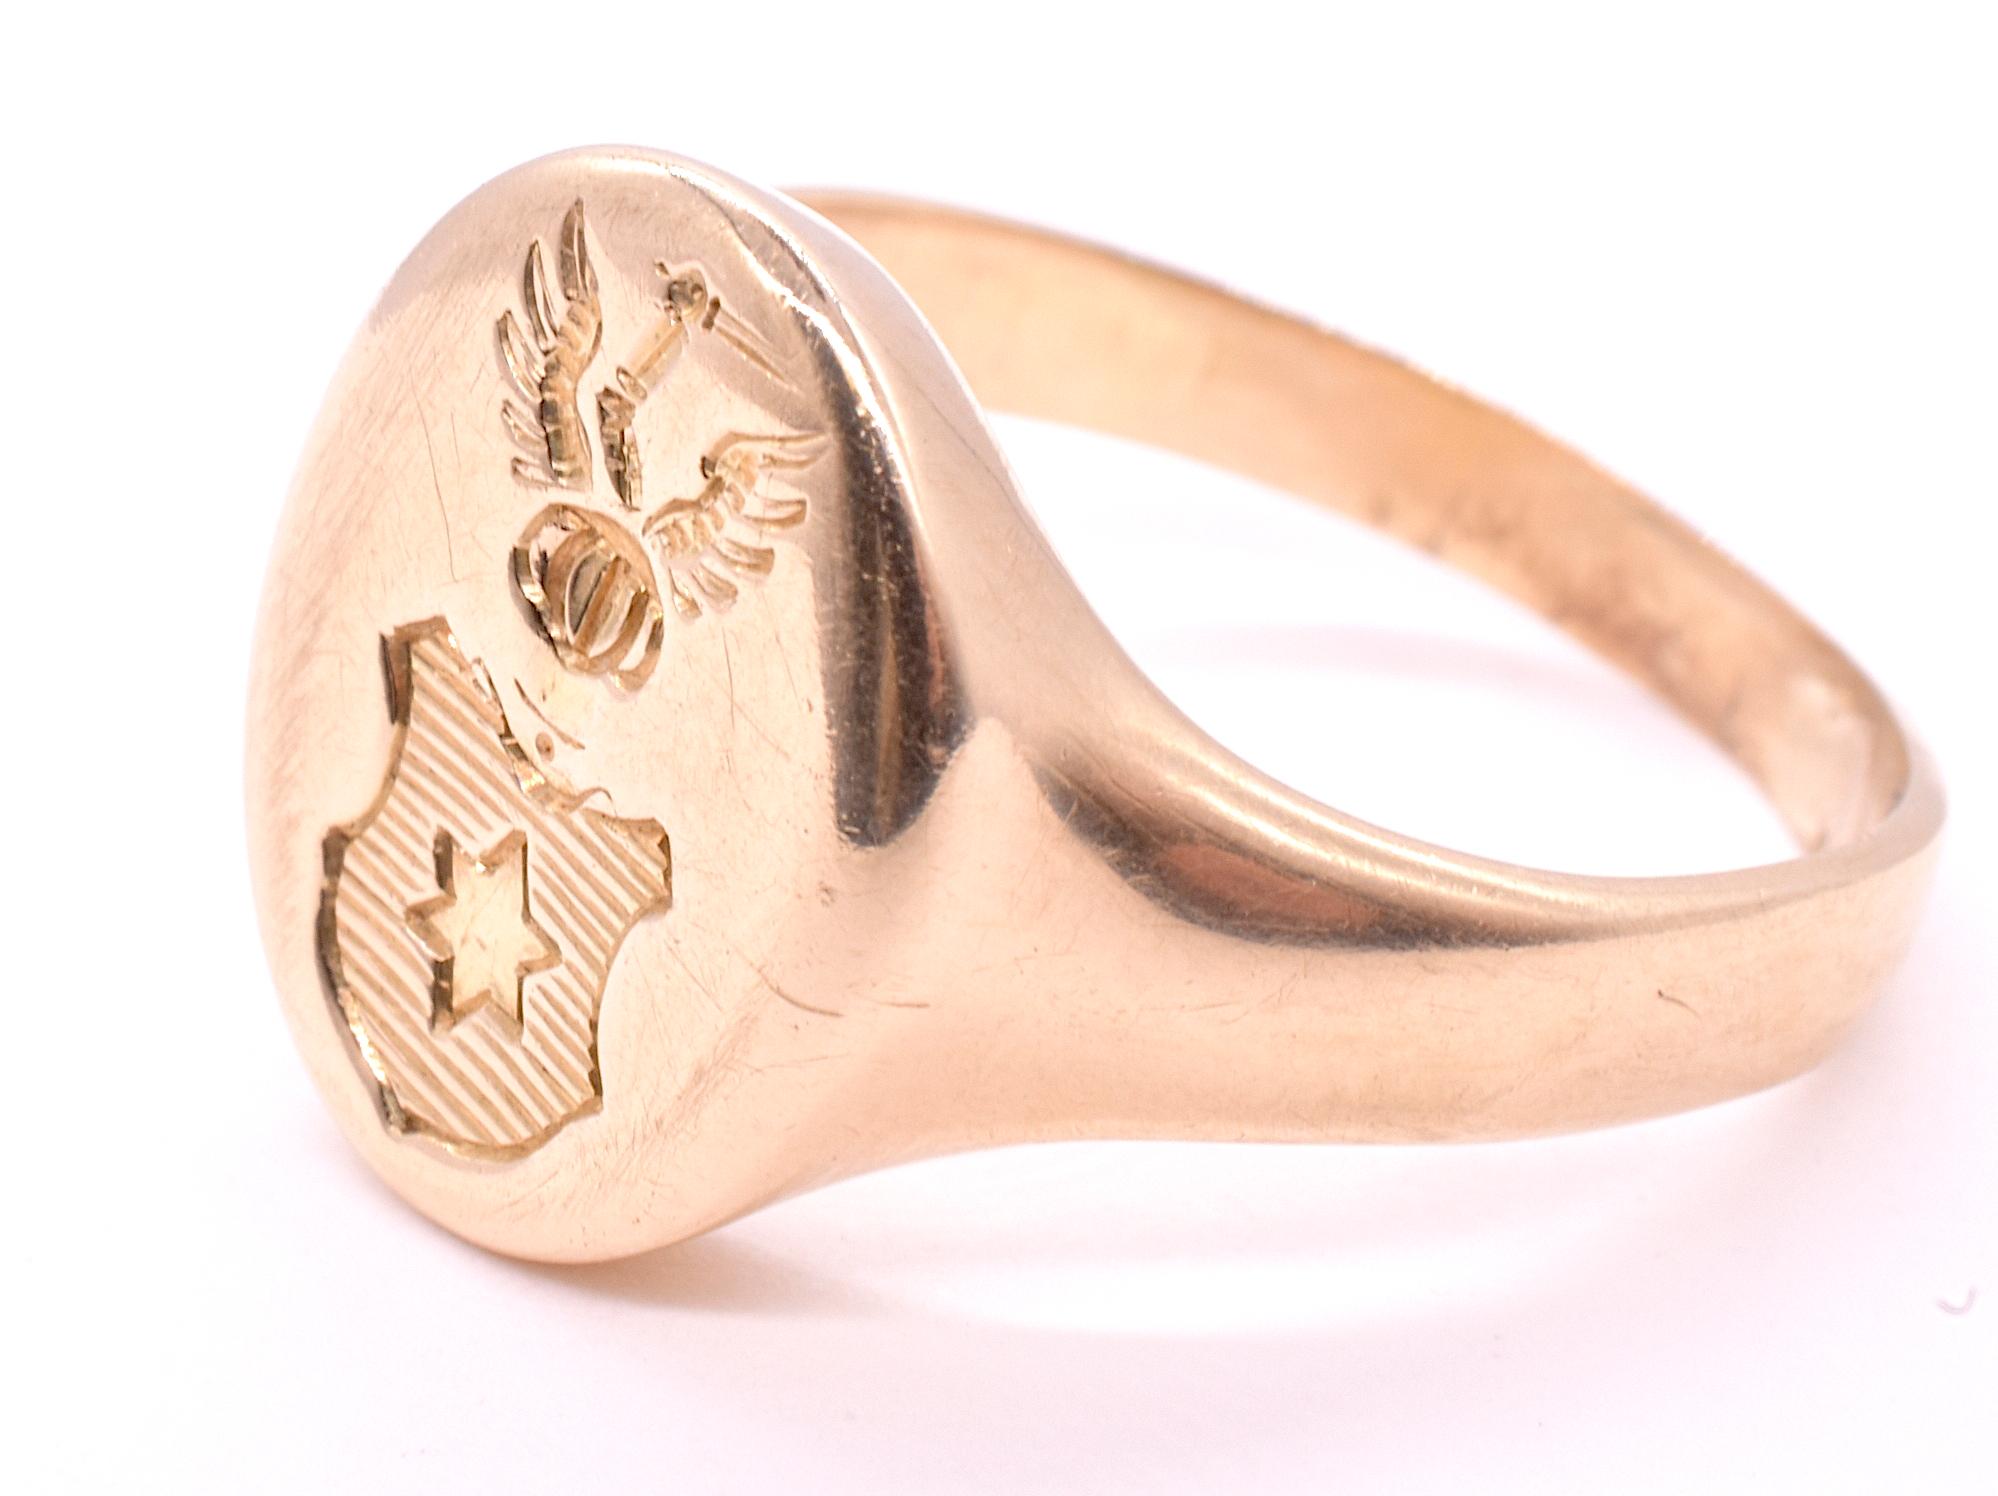 C1960 14K Gold Signet Ring with Royal Coat of Arms and Helmet 1